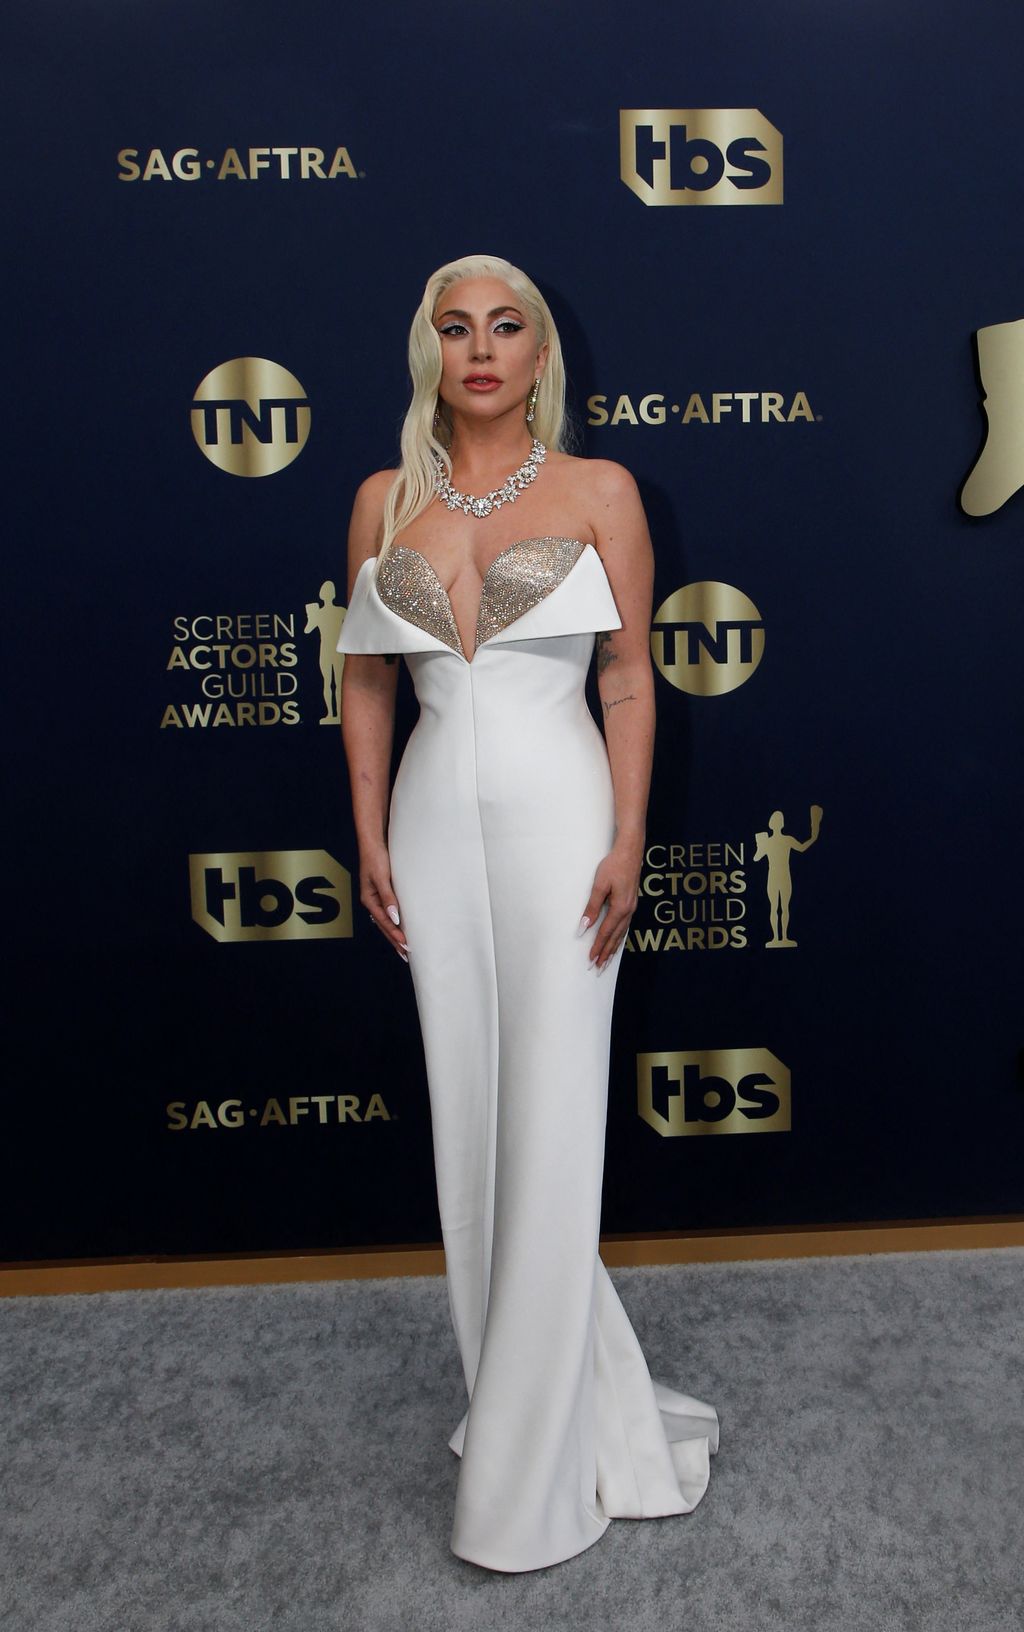 Lady Gaga attends the 28th Screen Actors Guild Awards, in Santa Monica, California, US, February 27, 2022. REUTERS/Aude Guerrucci